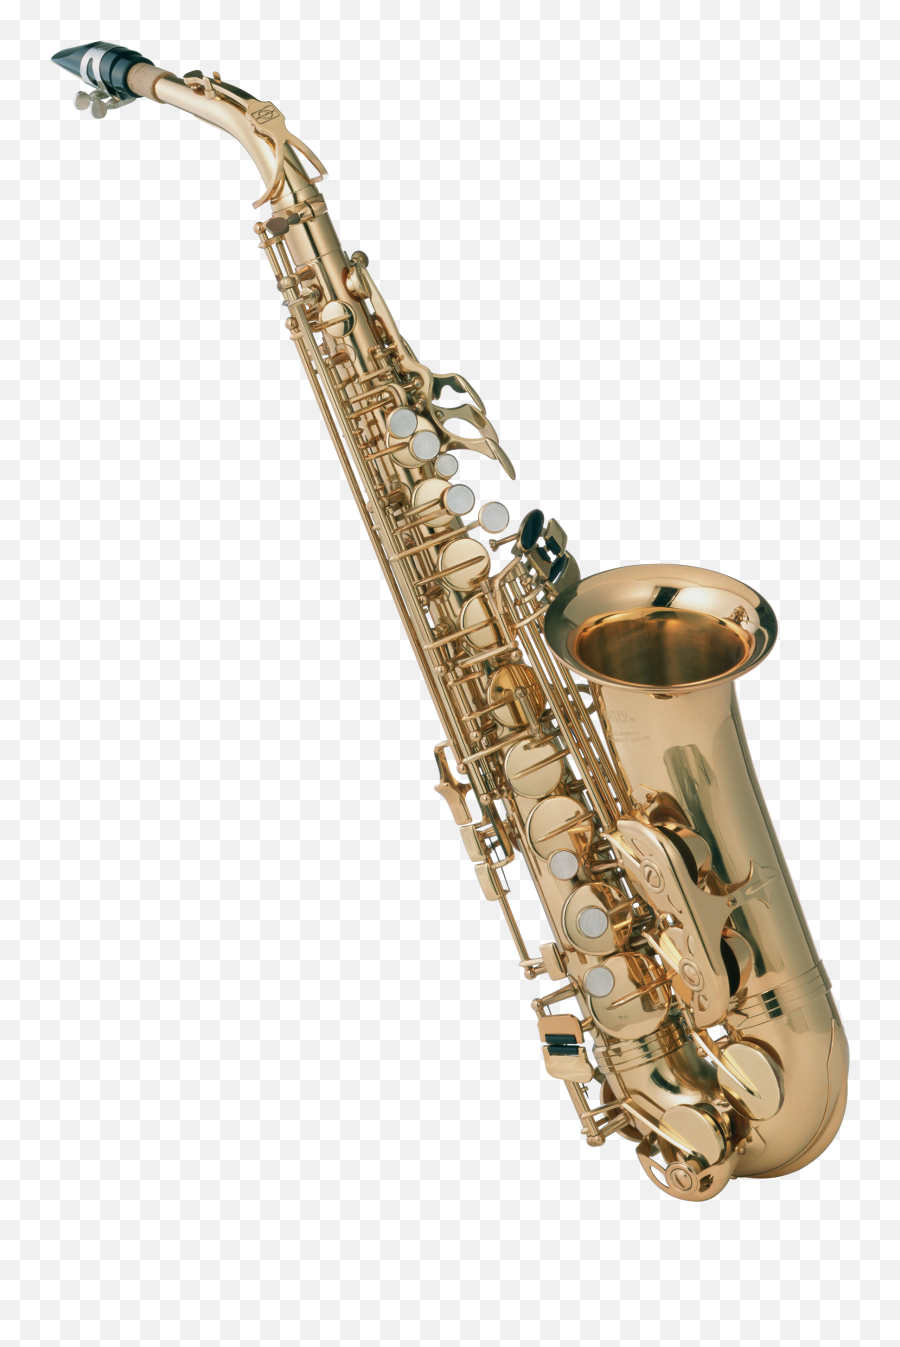 Saxophone Png Image For Free Download - Saxophone With Transparent Background,Sax Png